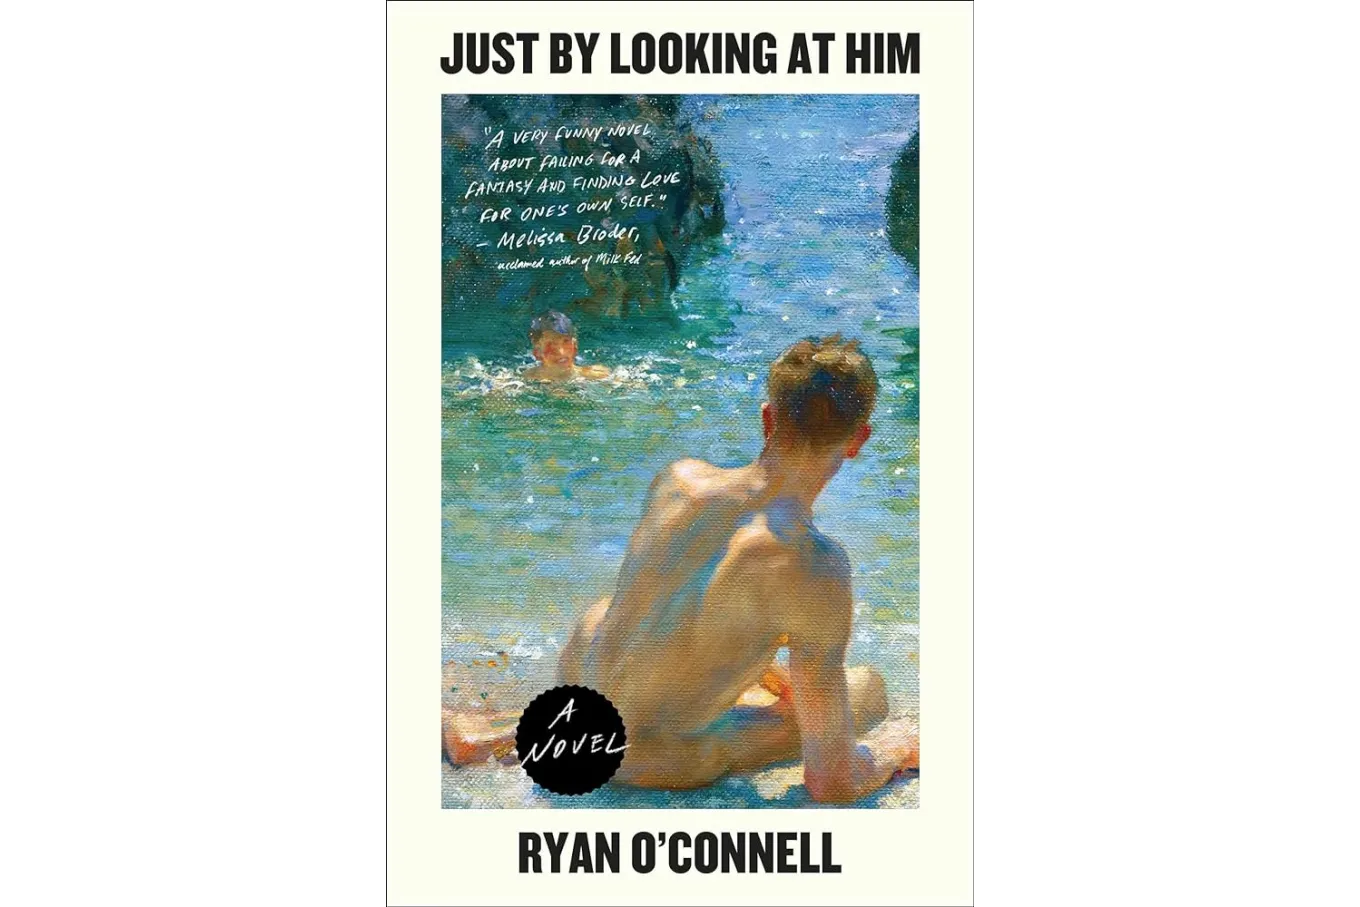 A naked man sitting on the beach on a sunny day gazes out at another man who, submerged up to his shoulders, smiles in the direction of the first man.